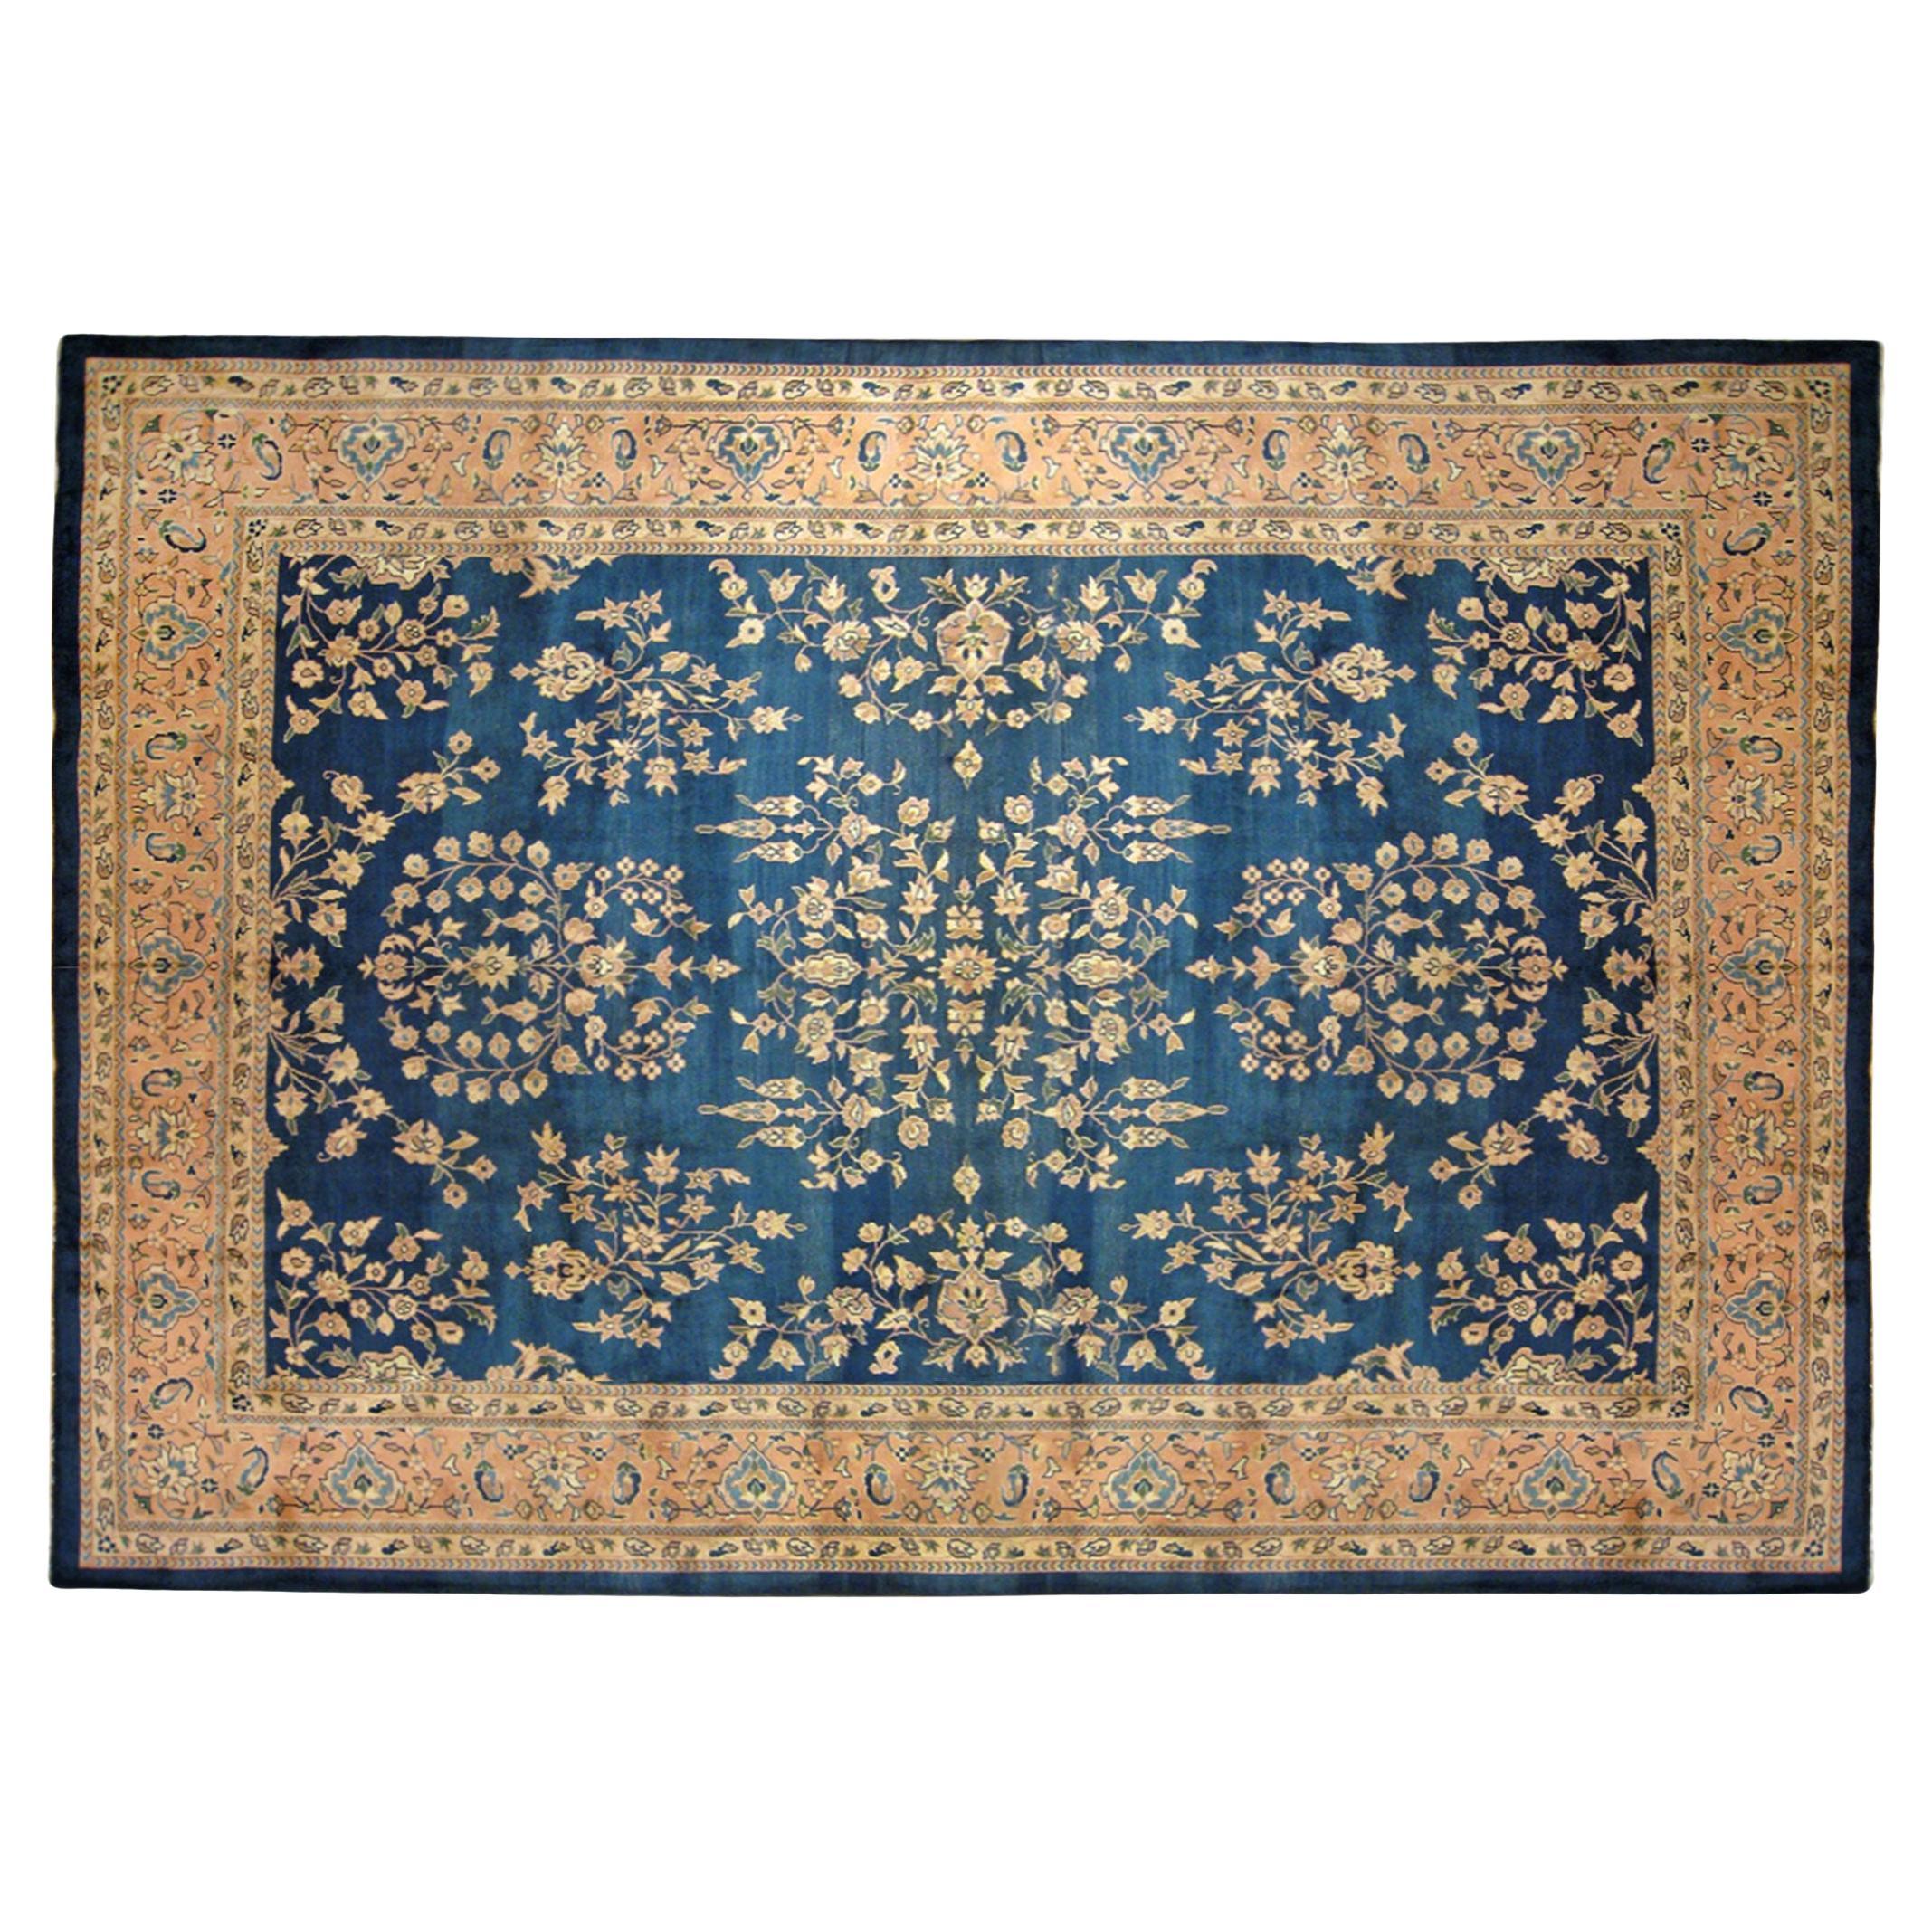 Antique Indian Oriental Rug, in Room Size, with Repeating Flower Elements